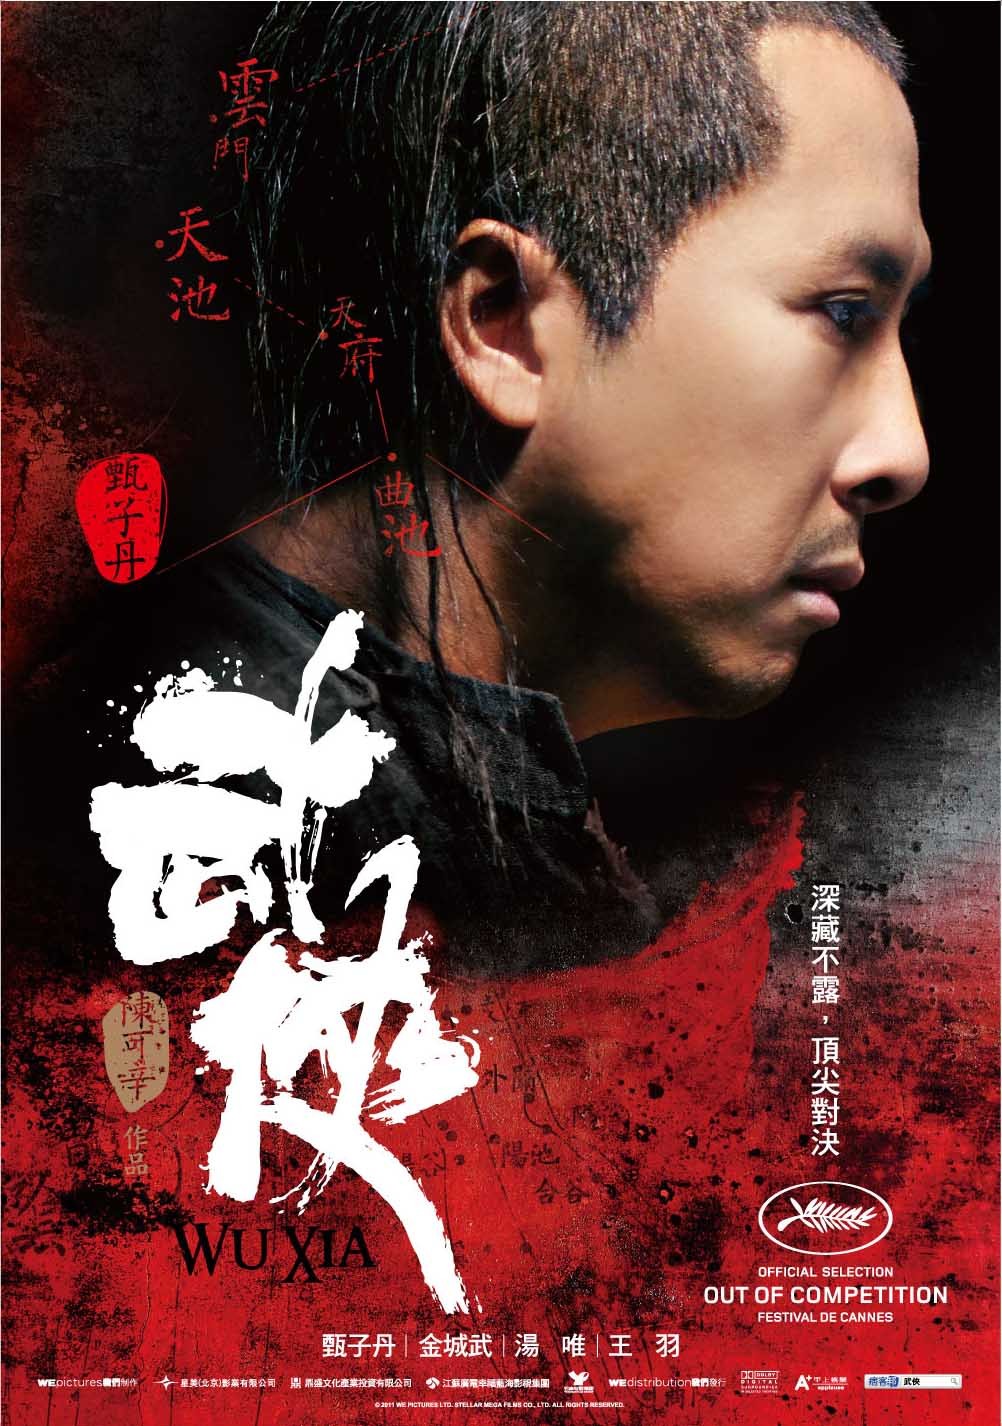 Extra Large Movie Poster Image for Wu xia (#1 of 4)